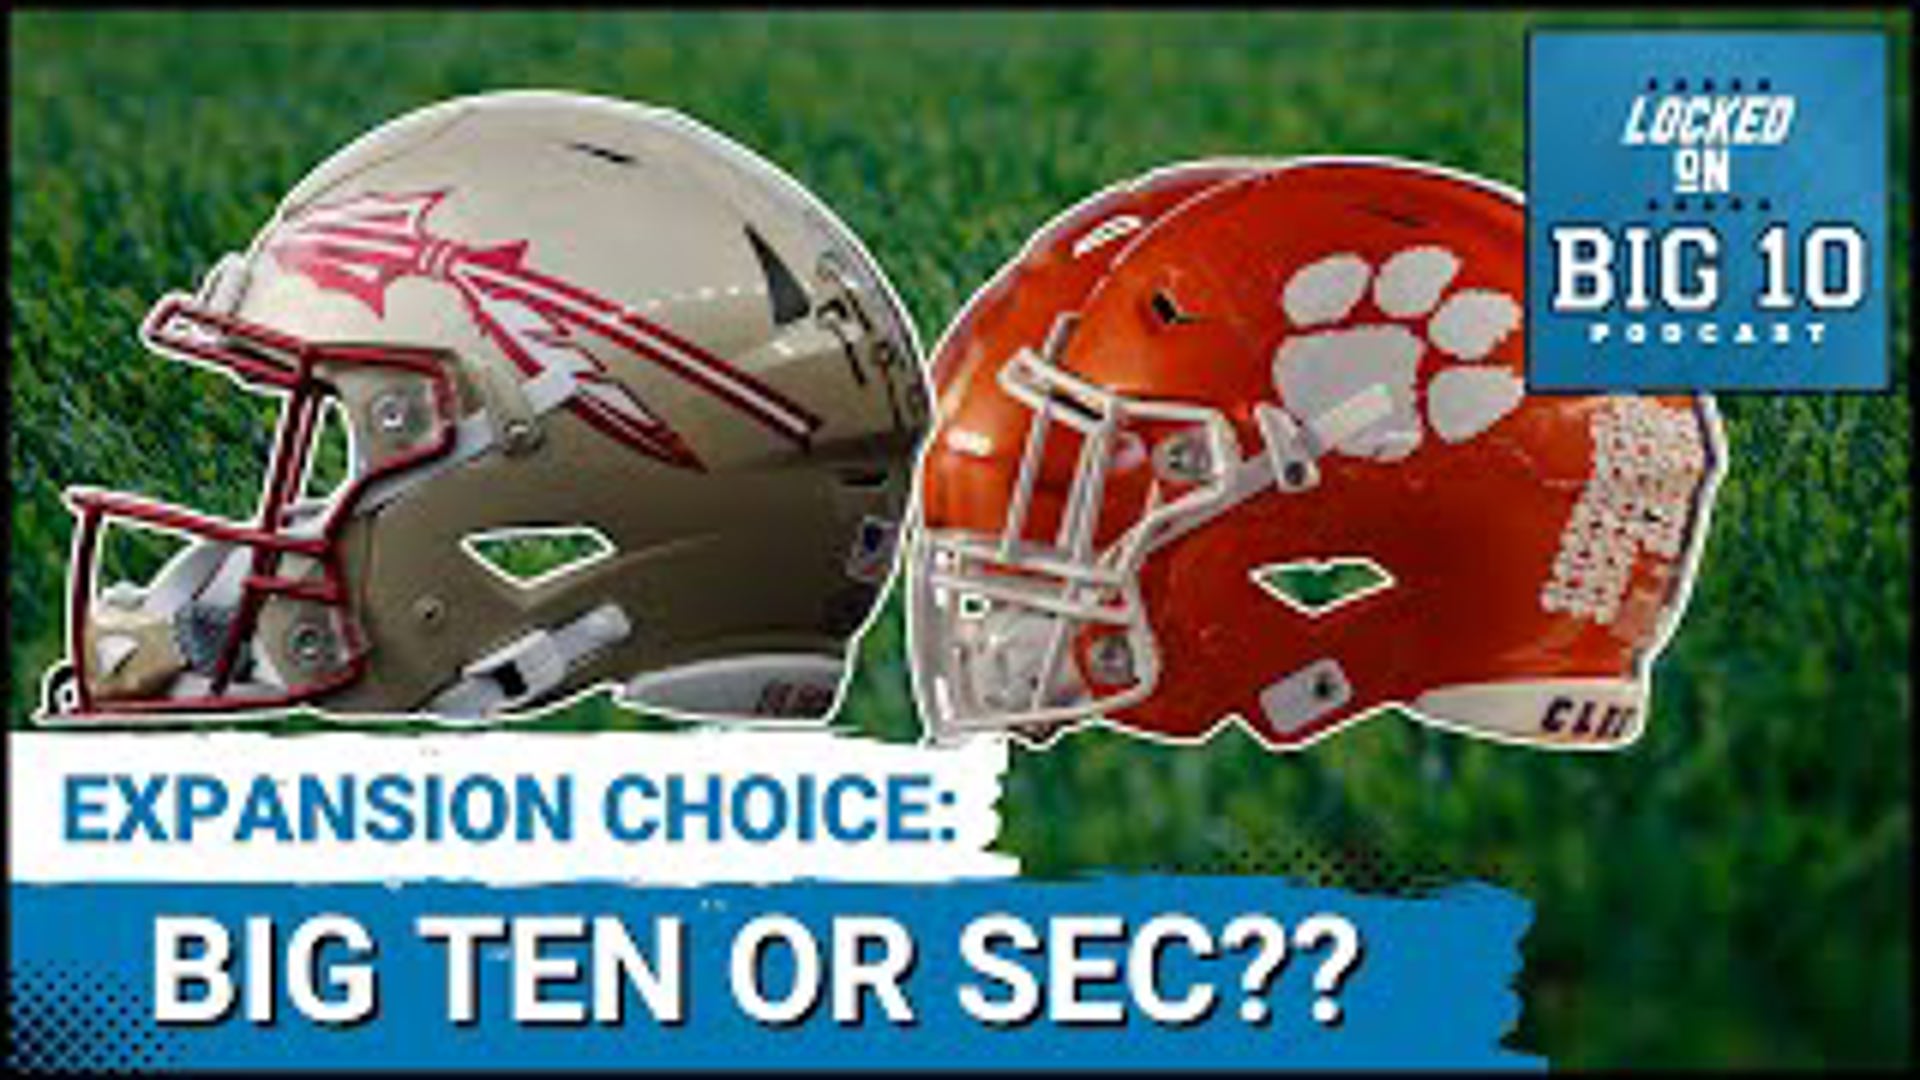 College football will flip upside down once the ACC blows up, and it WILL blow up!  Then Florida State and Clemson, which are both trying to sue their way out.